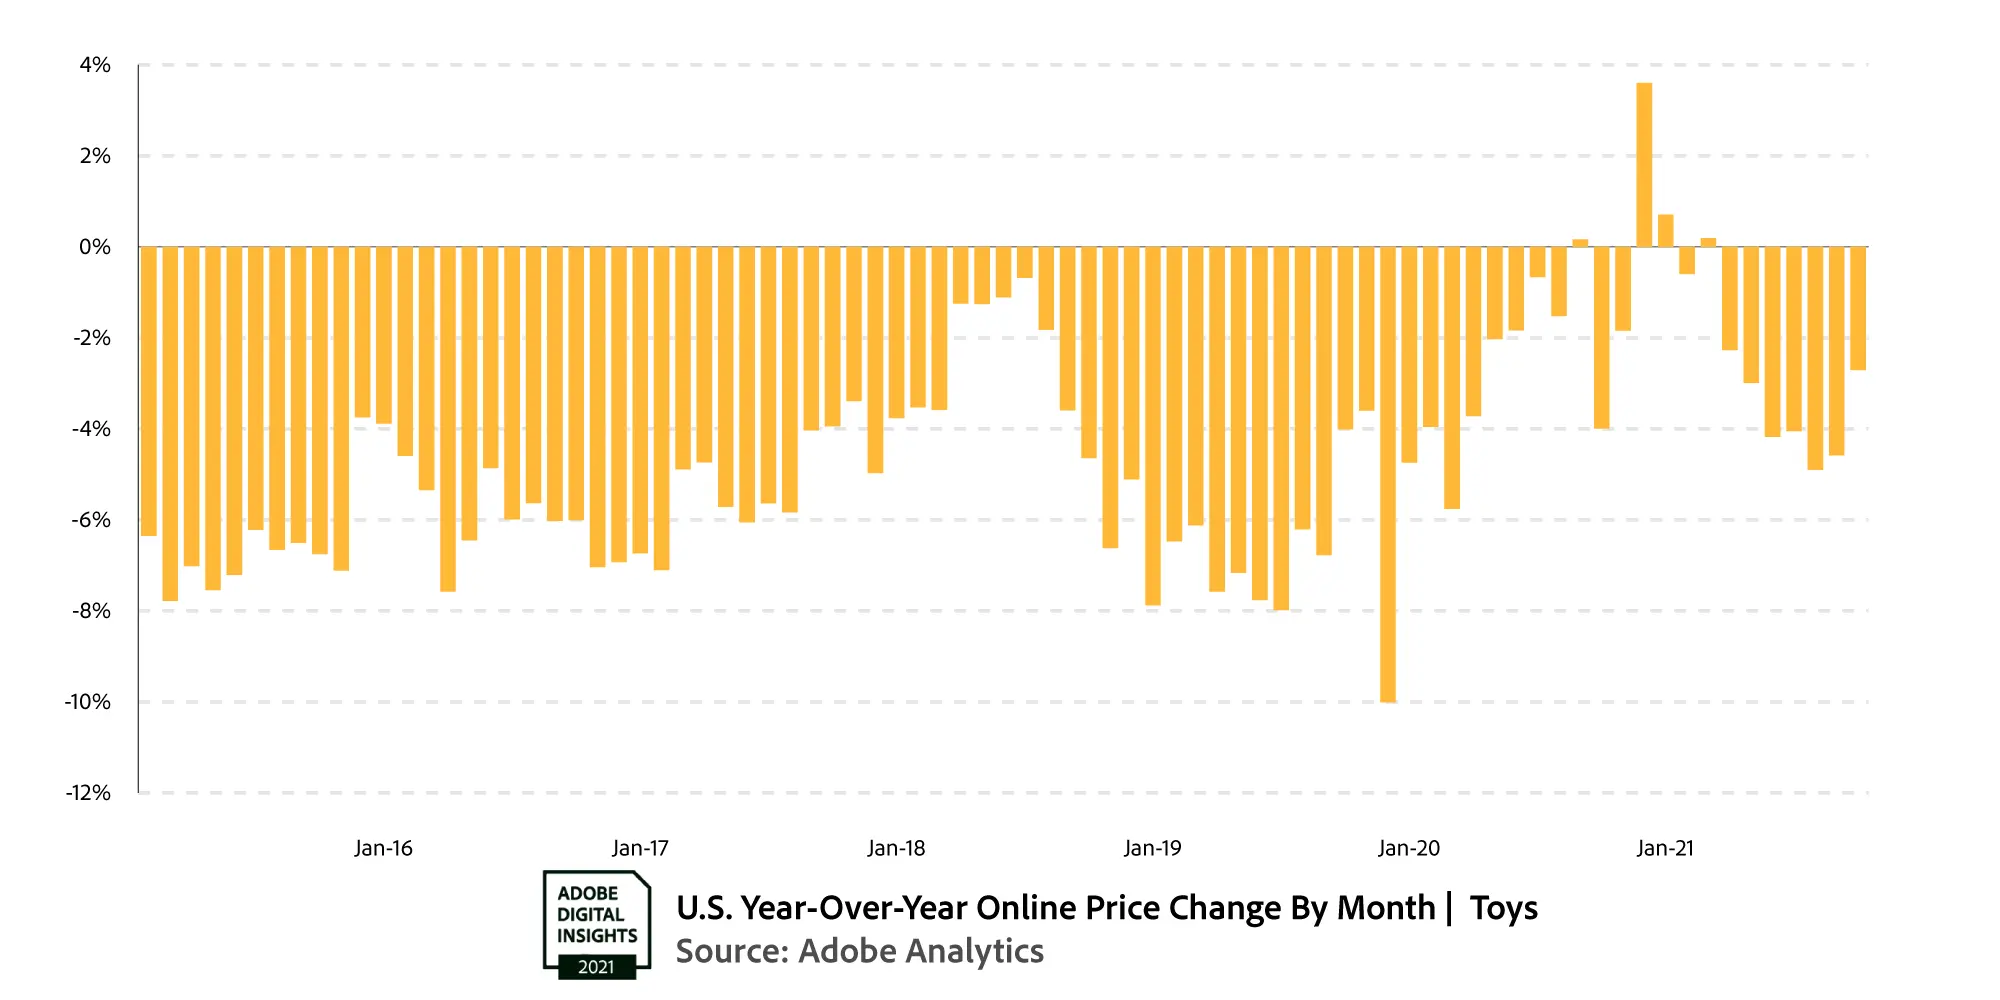 Adobe Digital Economy Index: YoY change in online prices for toys. 